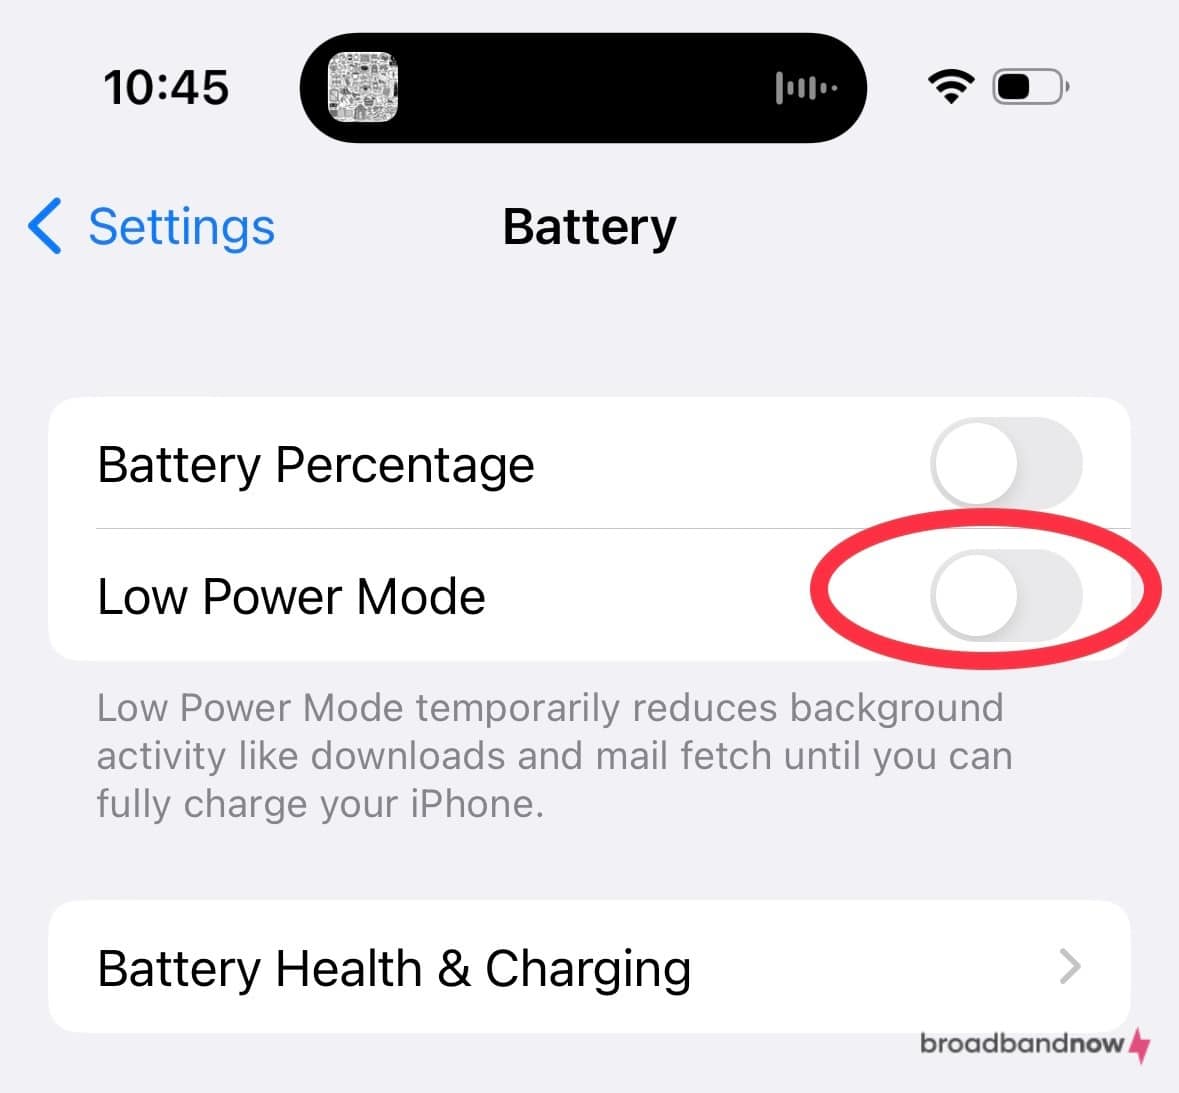 eenshot of an iPhone’s battery settings that shows the user turning off Low Power Mode.